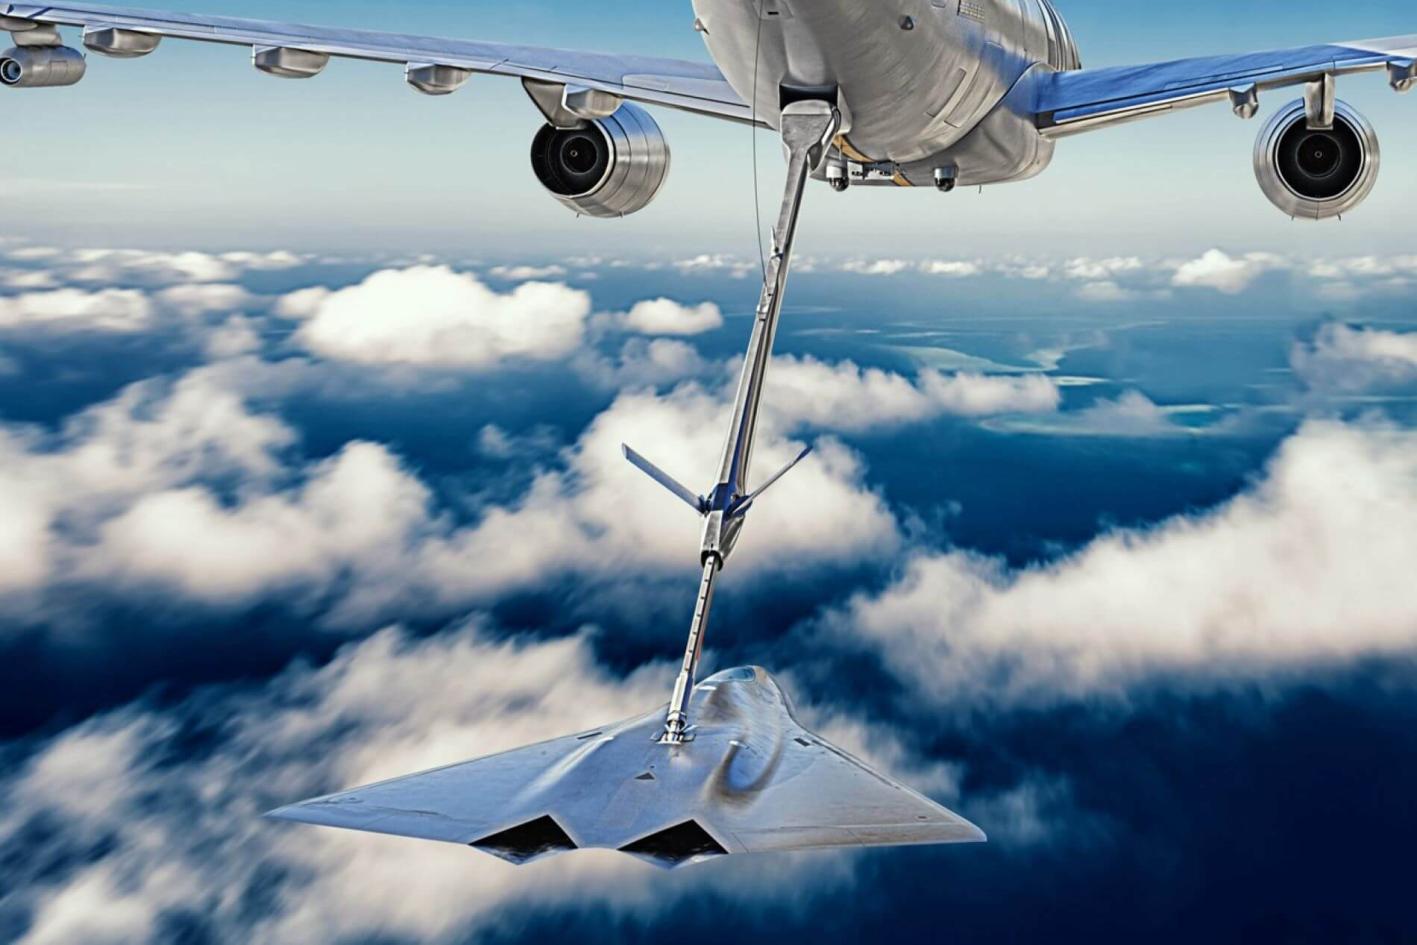 What are the Key Innovations Behind Lockheed Martin's Aircraft Designs?